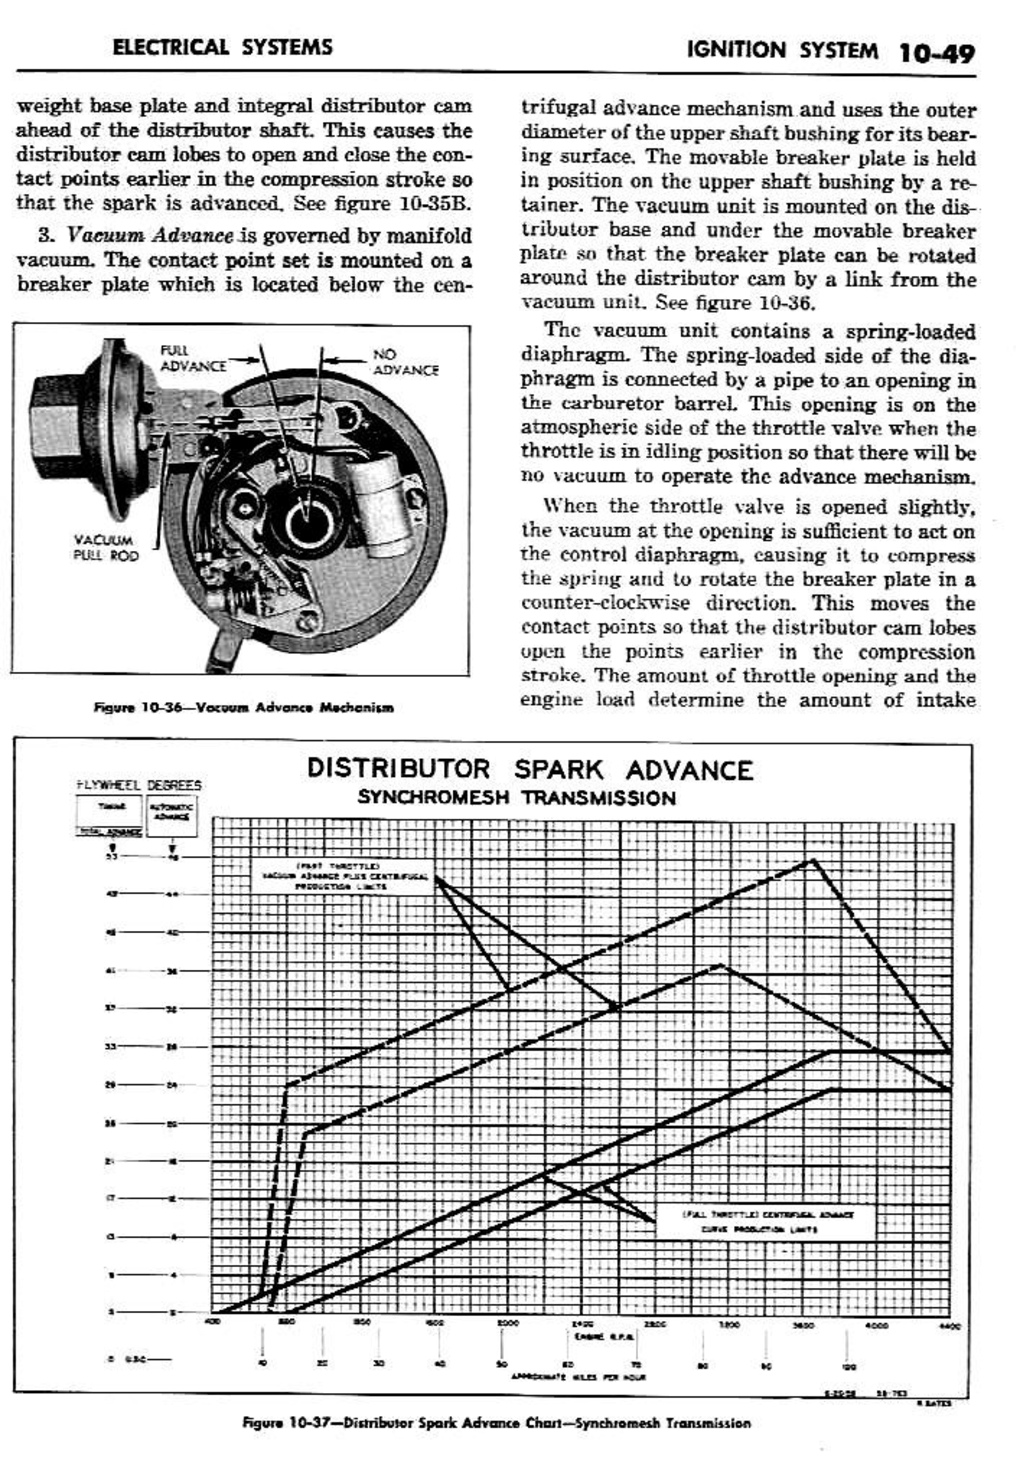 n_11 1959 Buick Shop Manual - Electrical Systems-049-049.jpg